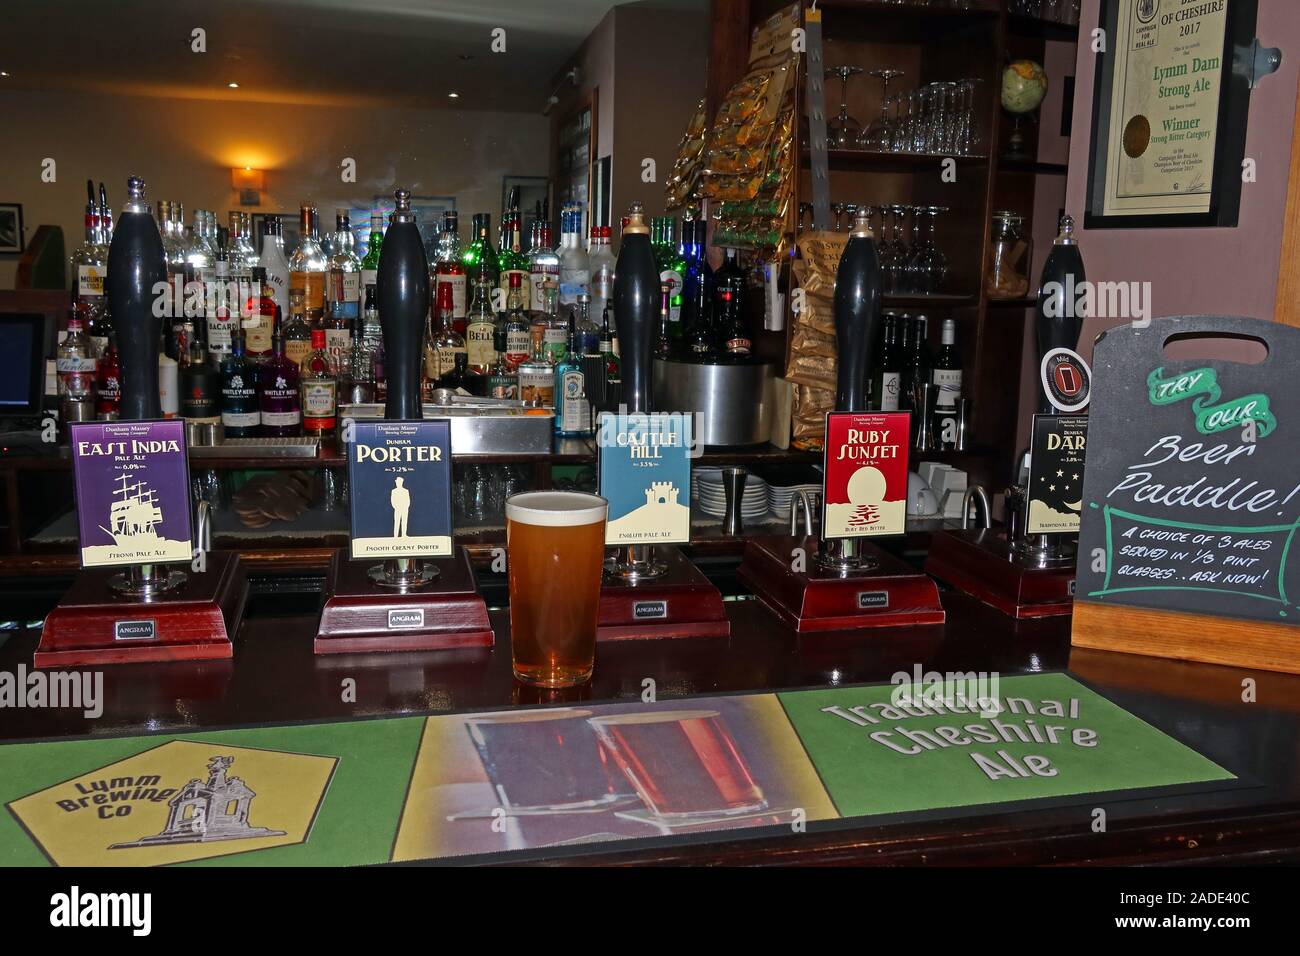 The Brewery Tap,Lymm Village,bar with pumps,real ales,CAMRA Stock Photo